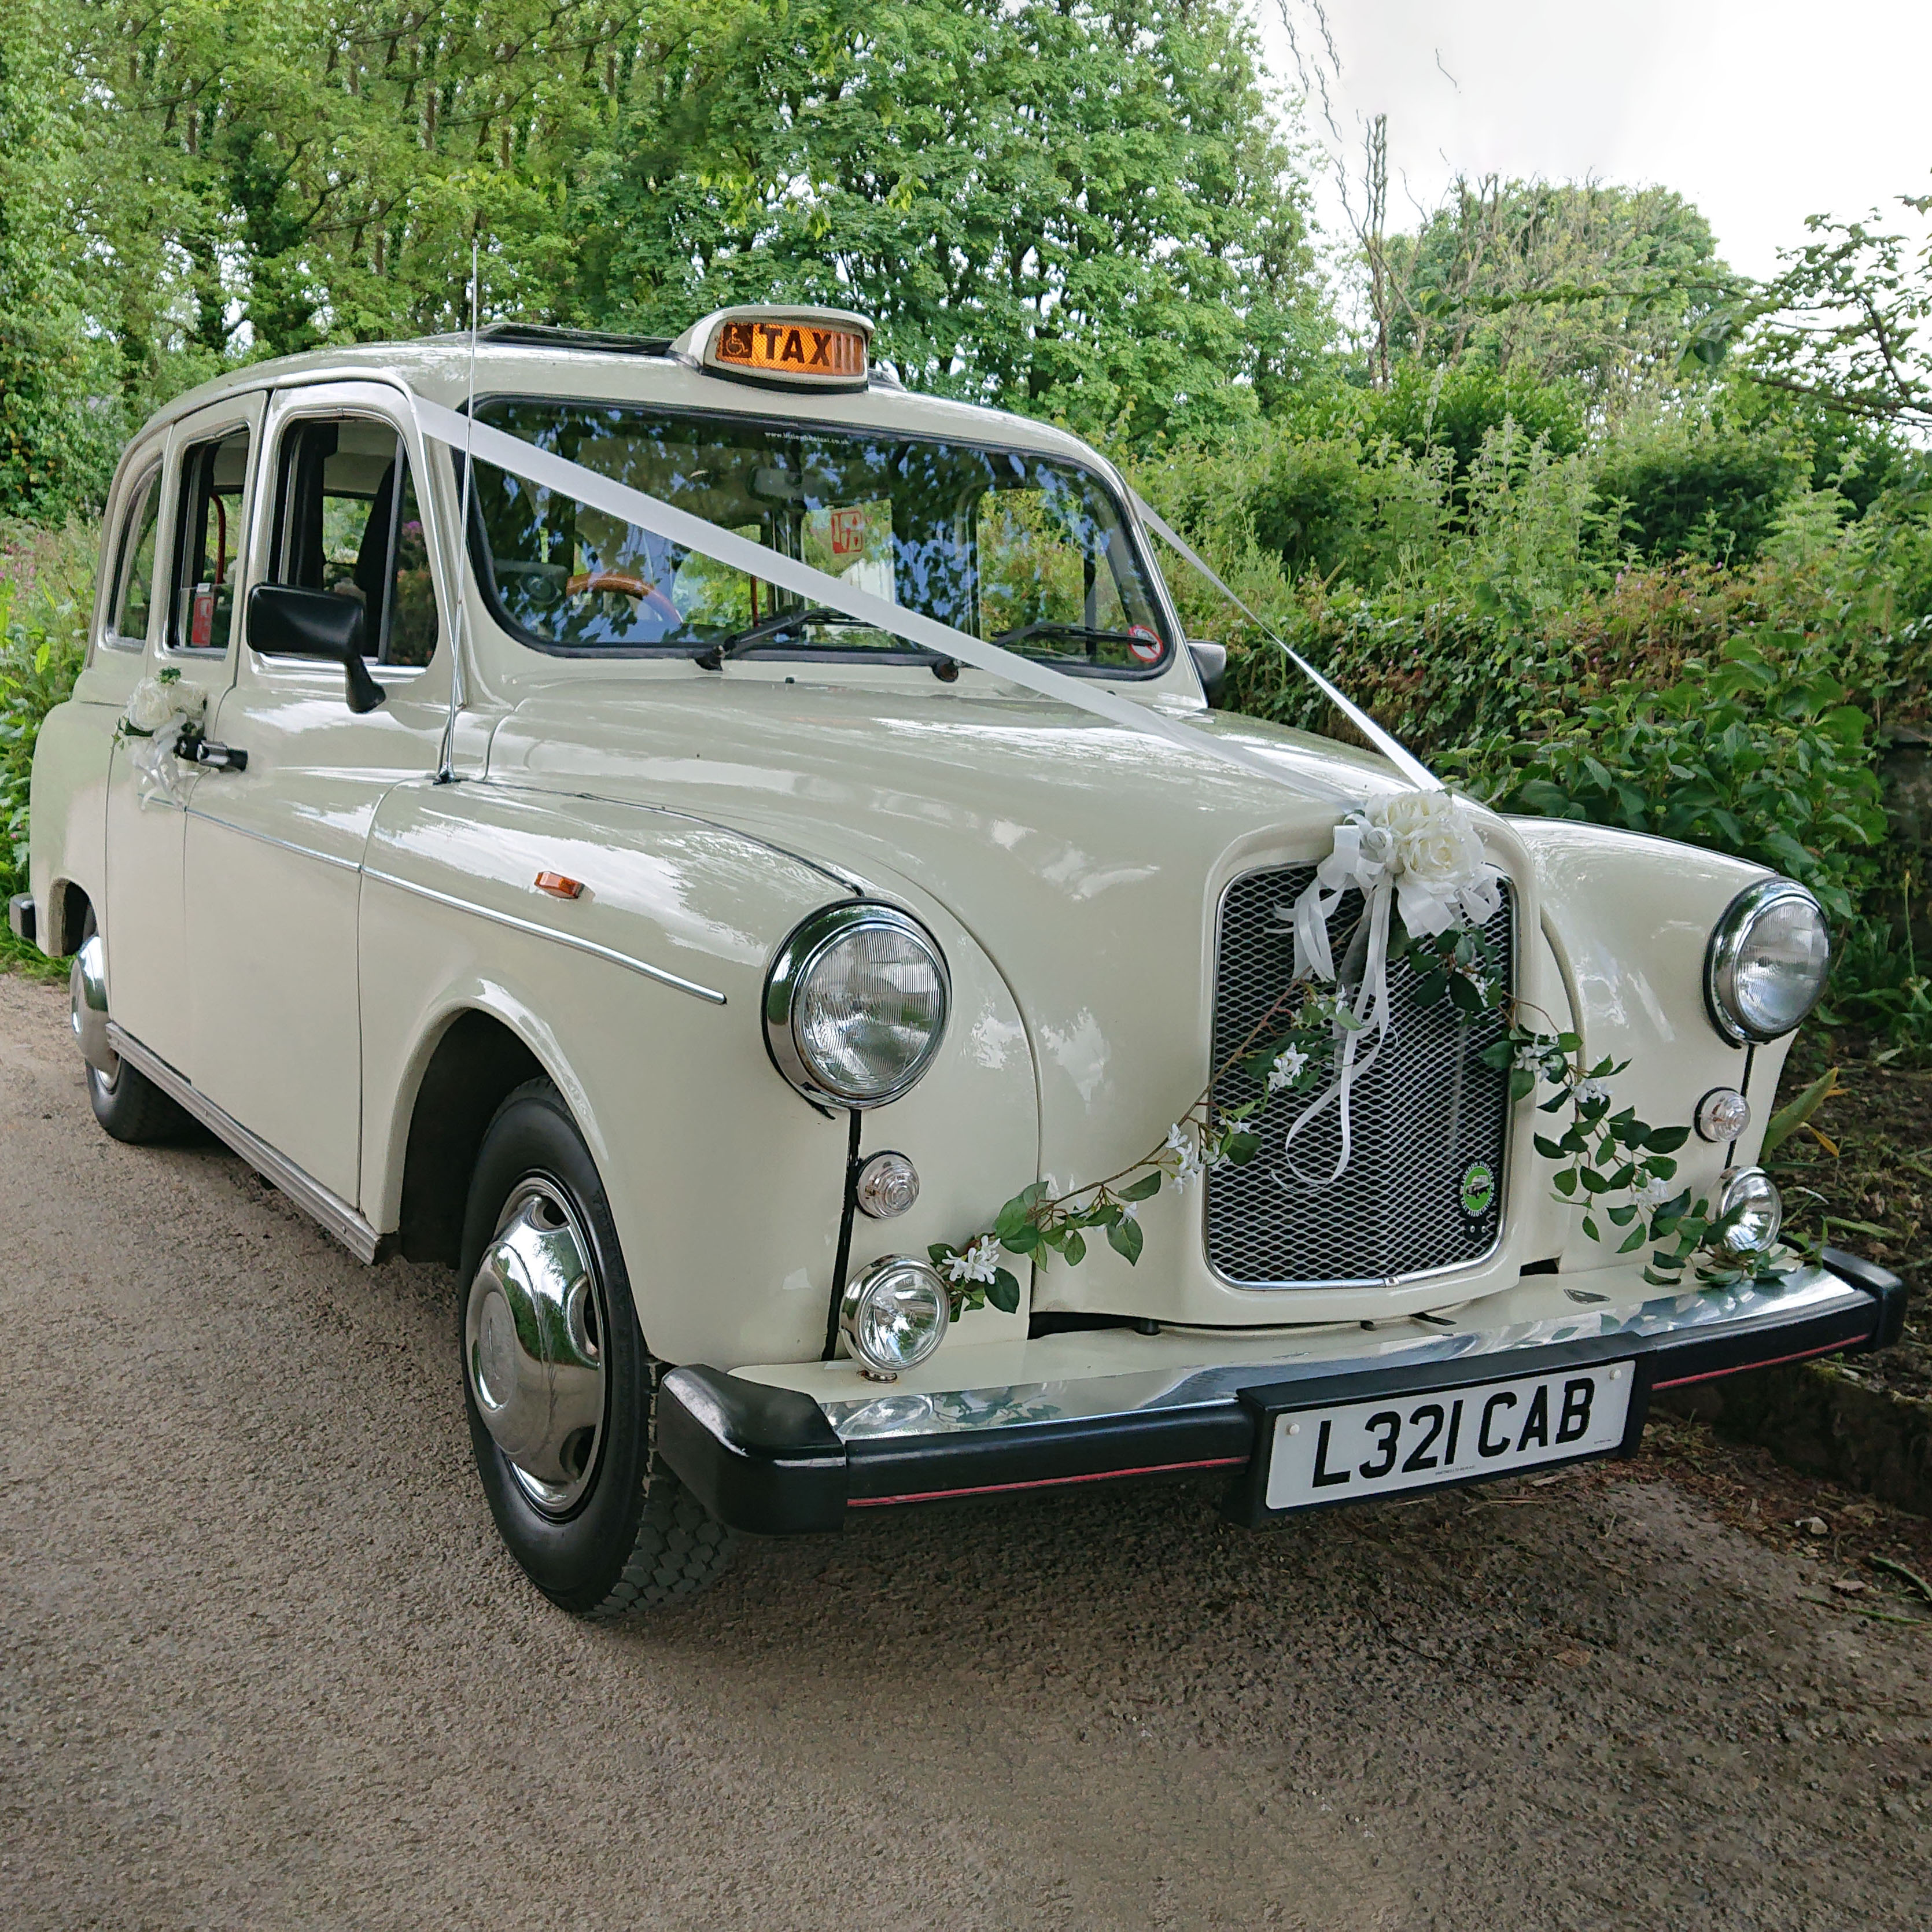 Classic Cream Taxi Cab decorated with white ribbon and floral arrangement on front bumper.